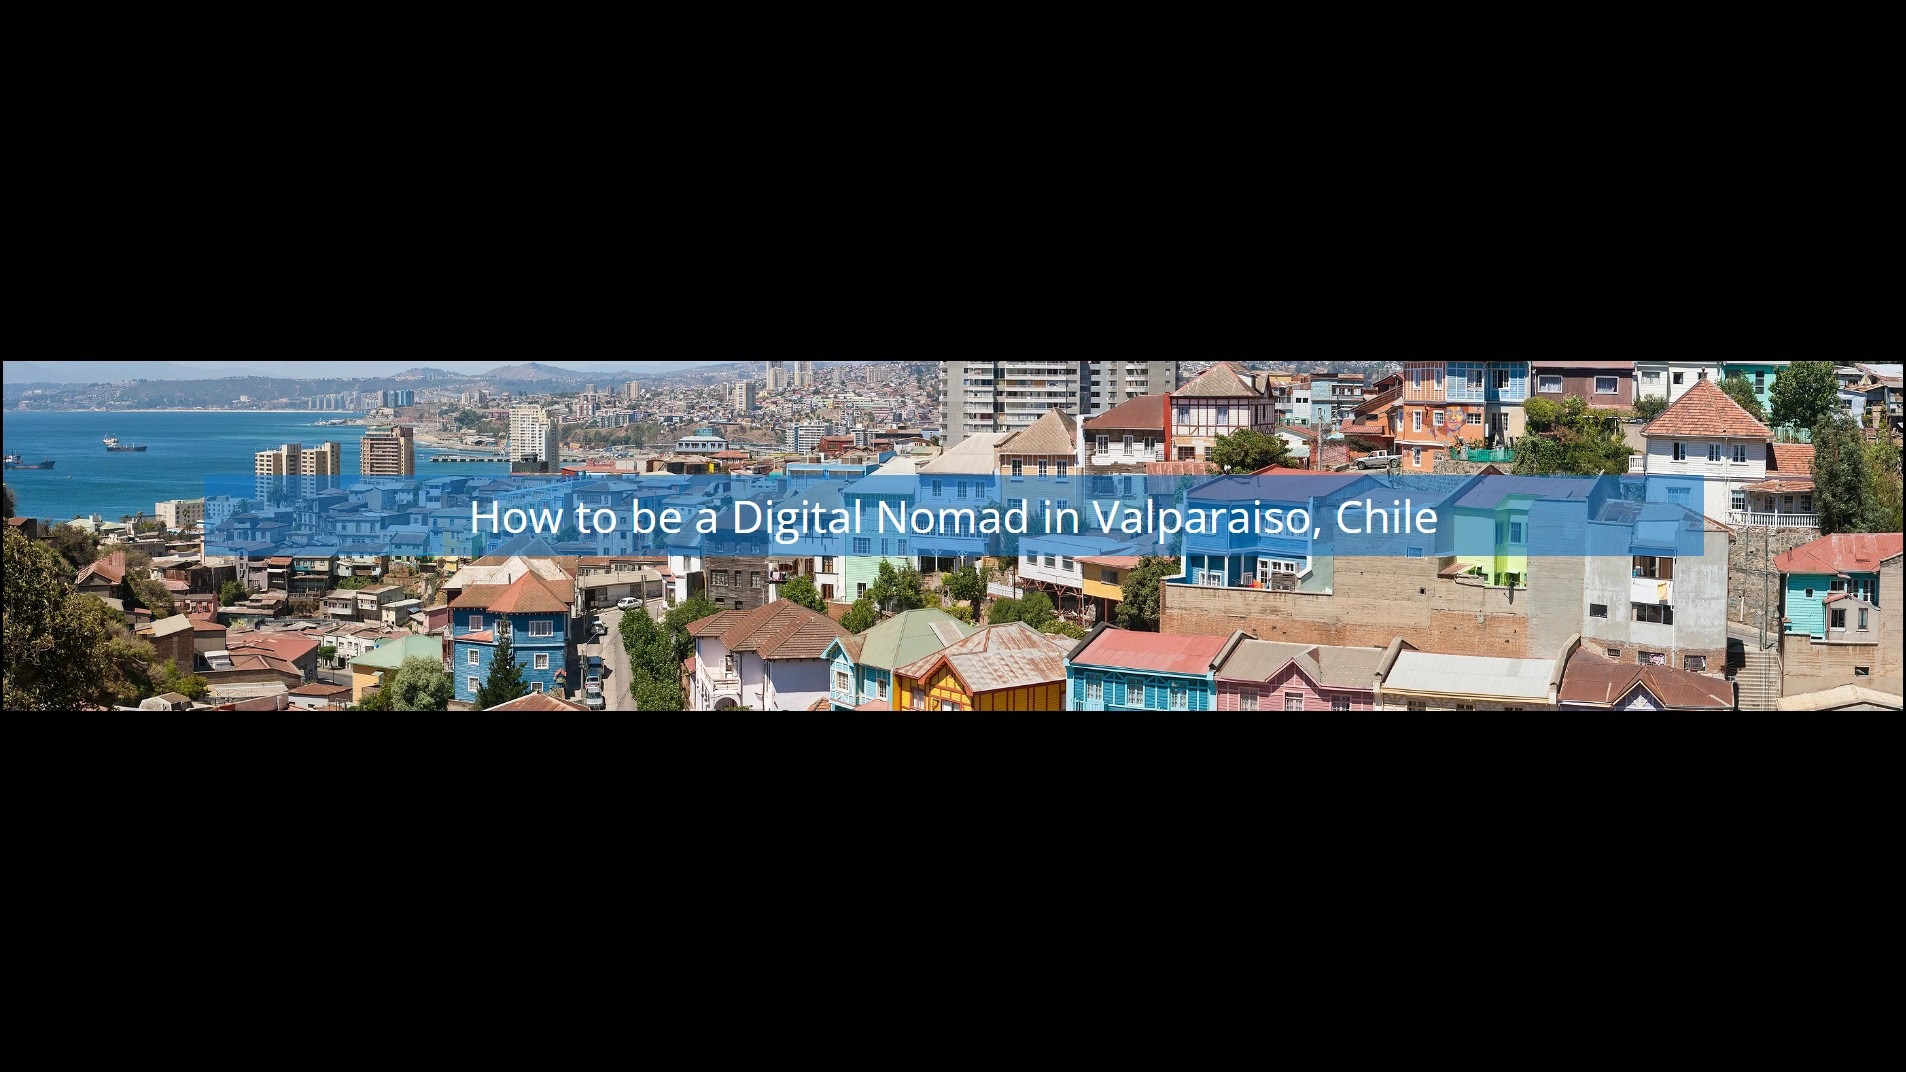 Valparaiso Coworking Spaces & Cost Of Living: Best Digital Nomad Guide